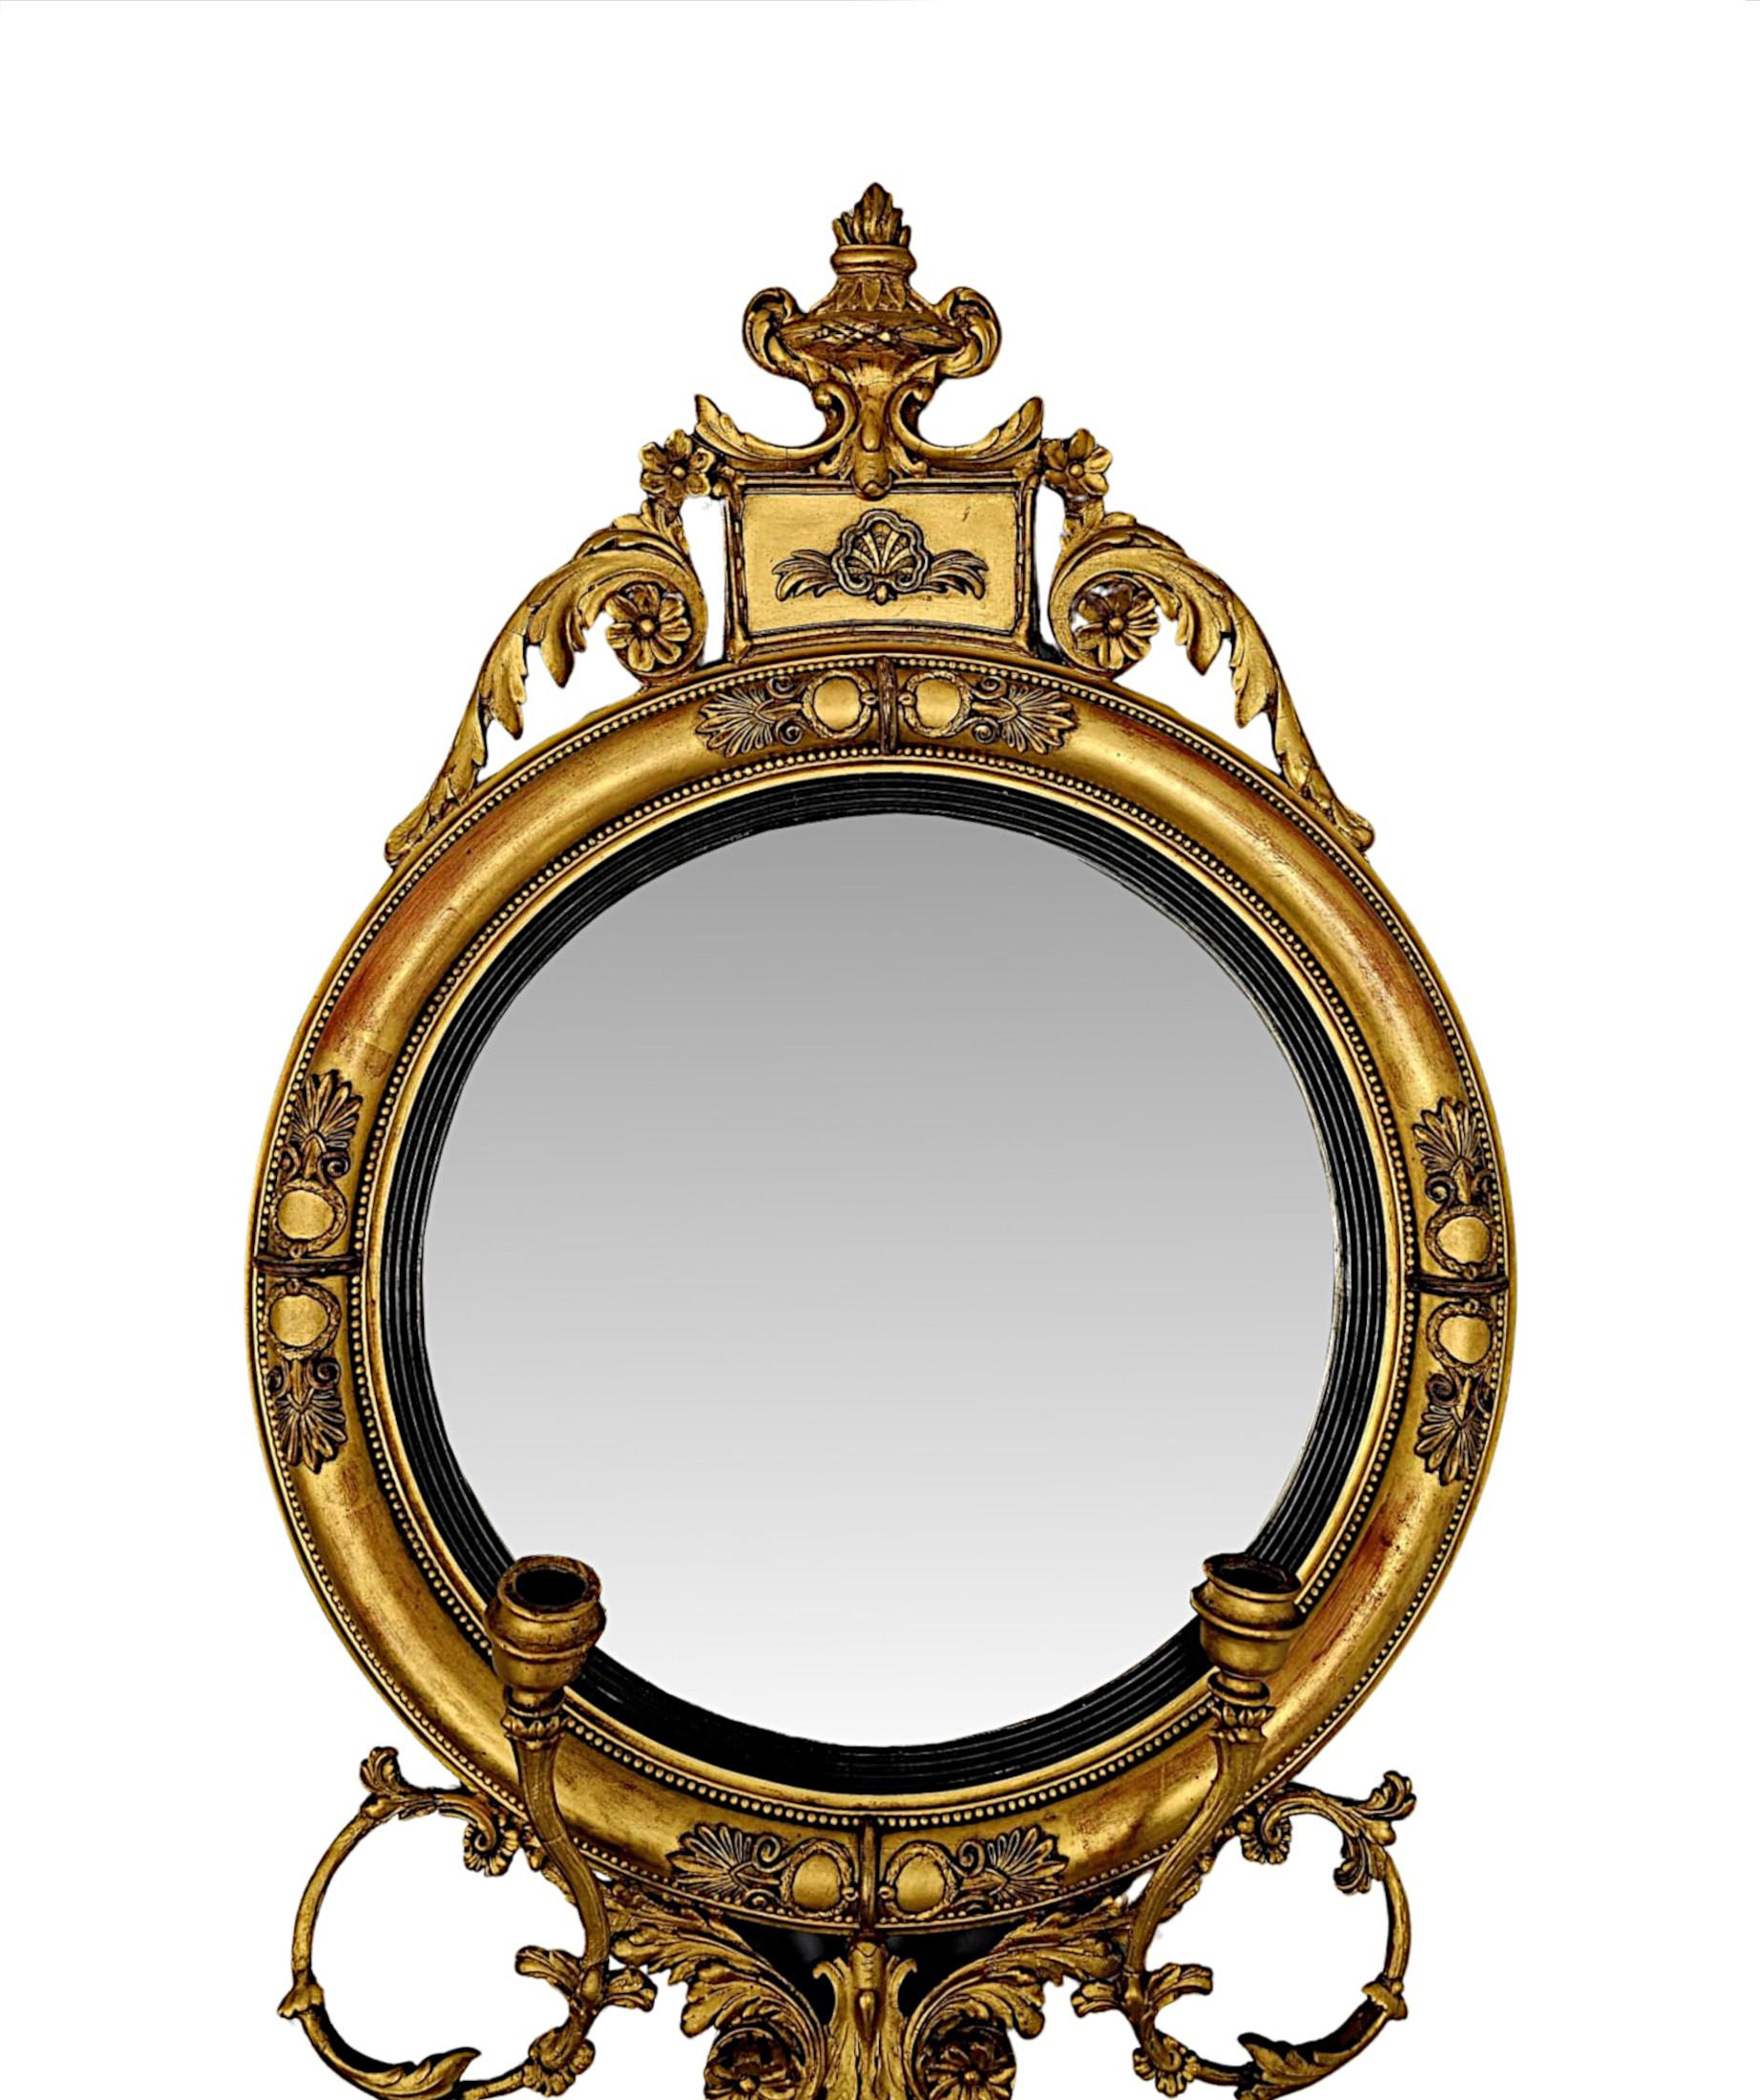 A very rare and fine 19th Century giltwood girondole hall or pier mirror of exceptional quality.  The convex mirror glass plate of circular form is set within a stunningly hand carved, moulded and fluted giltwood frame with gorgeous foliate,